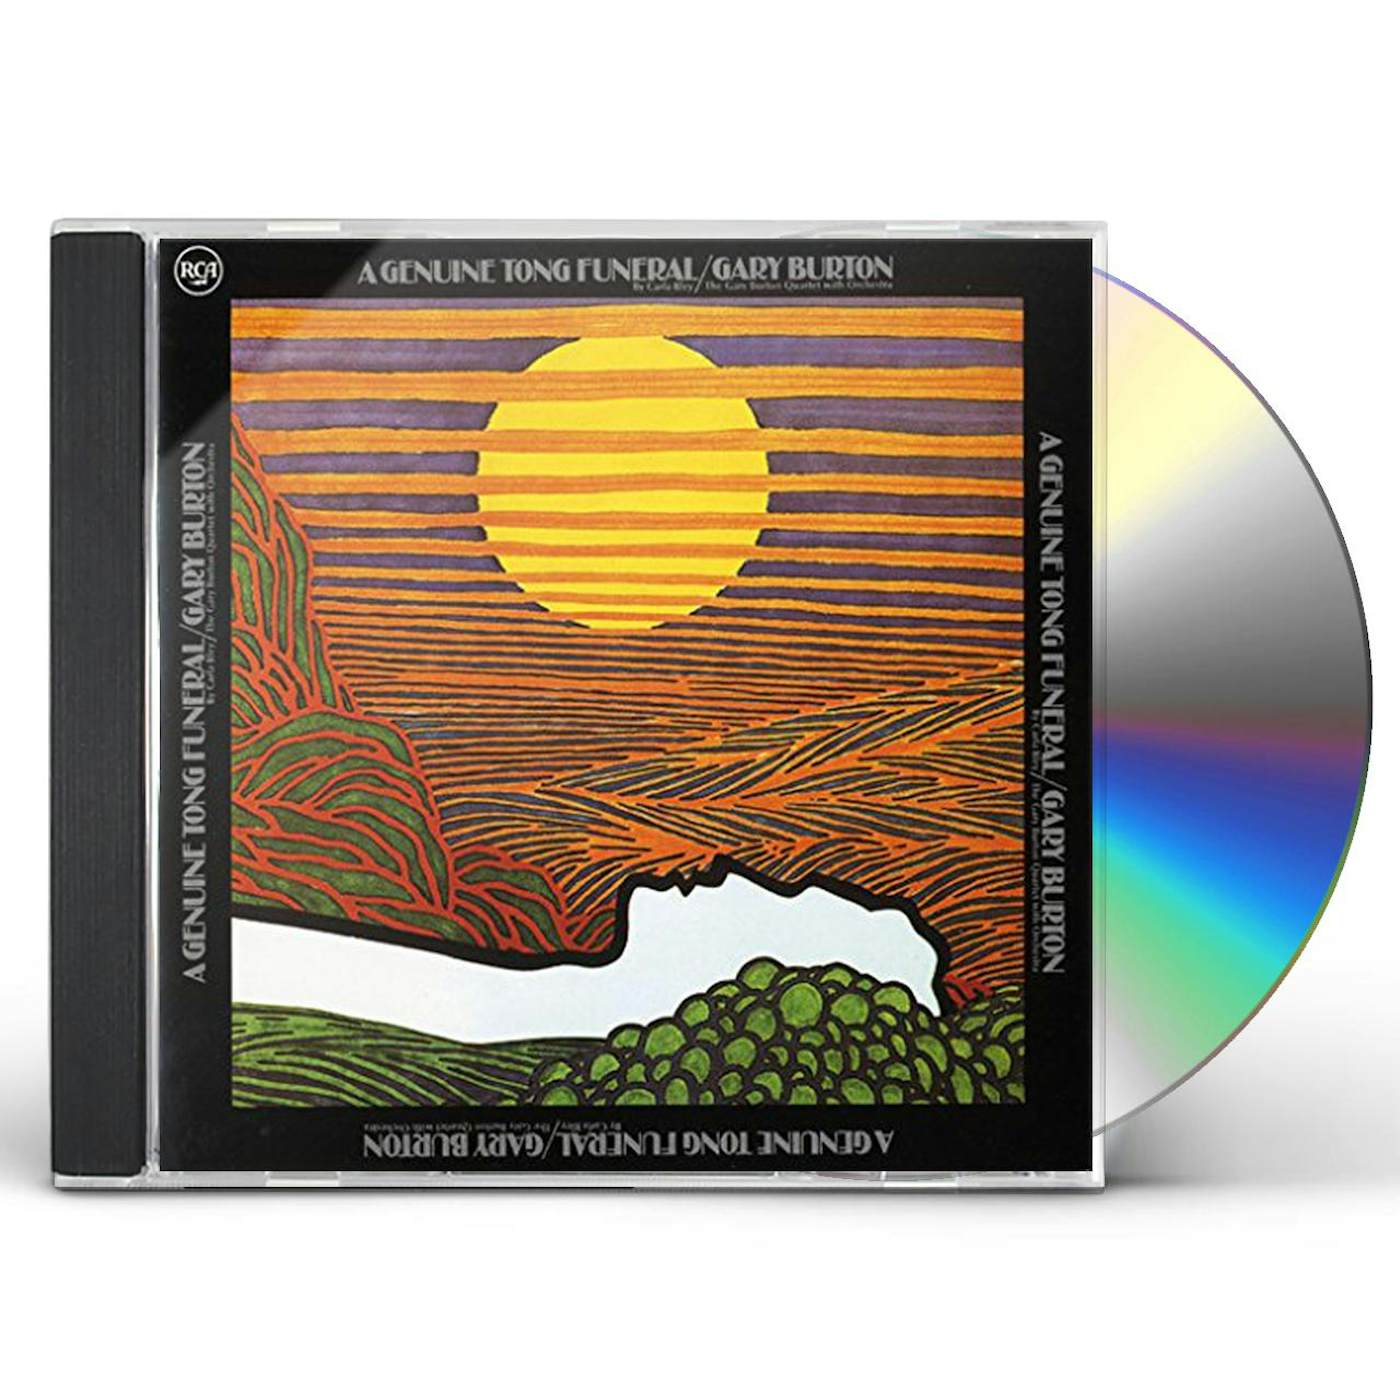 Gary Burton GENUINE TONG FUNERAL: LIMITED EDITION CD